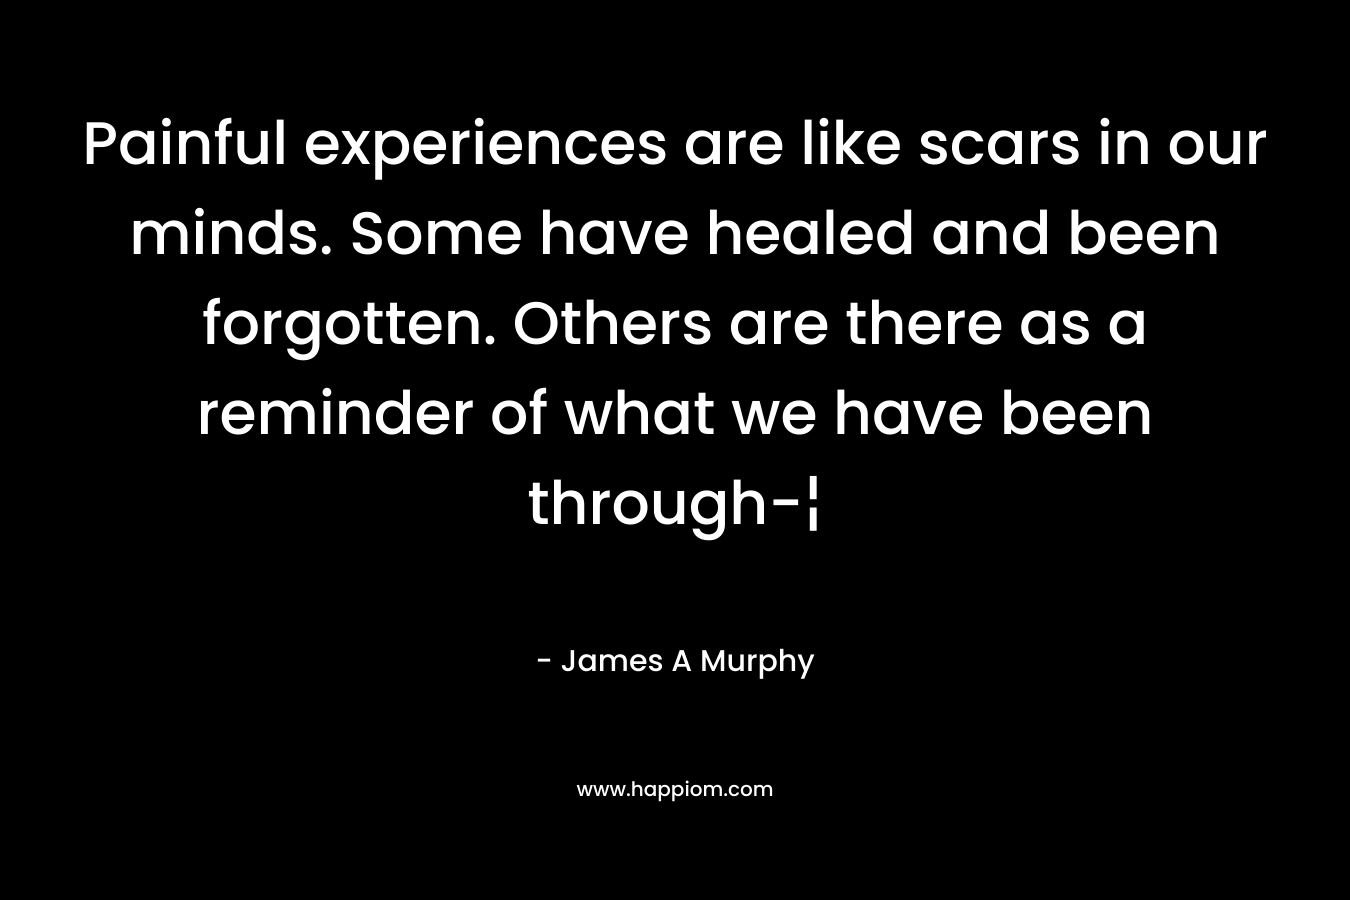 Painful experiences are like scars in our minds. Some have healed and been forgotten. Others are there as a reminder of what we have been through-¦ – James A Murphy